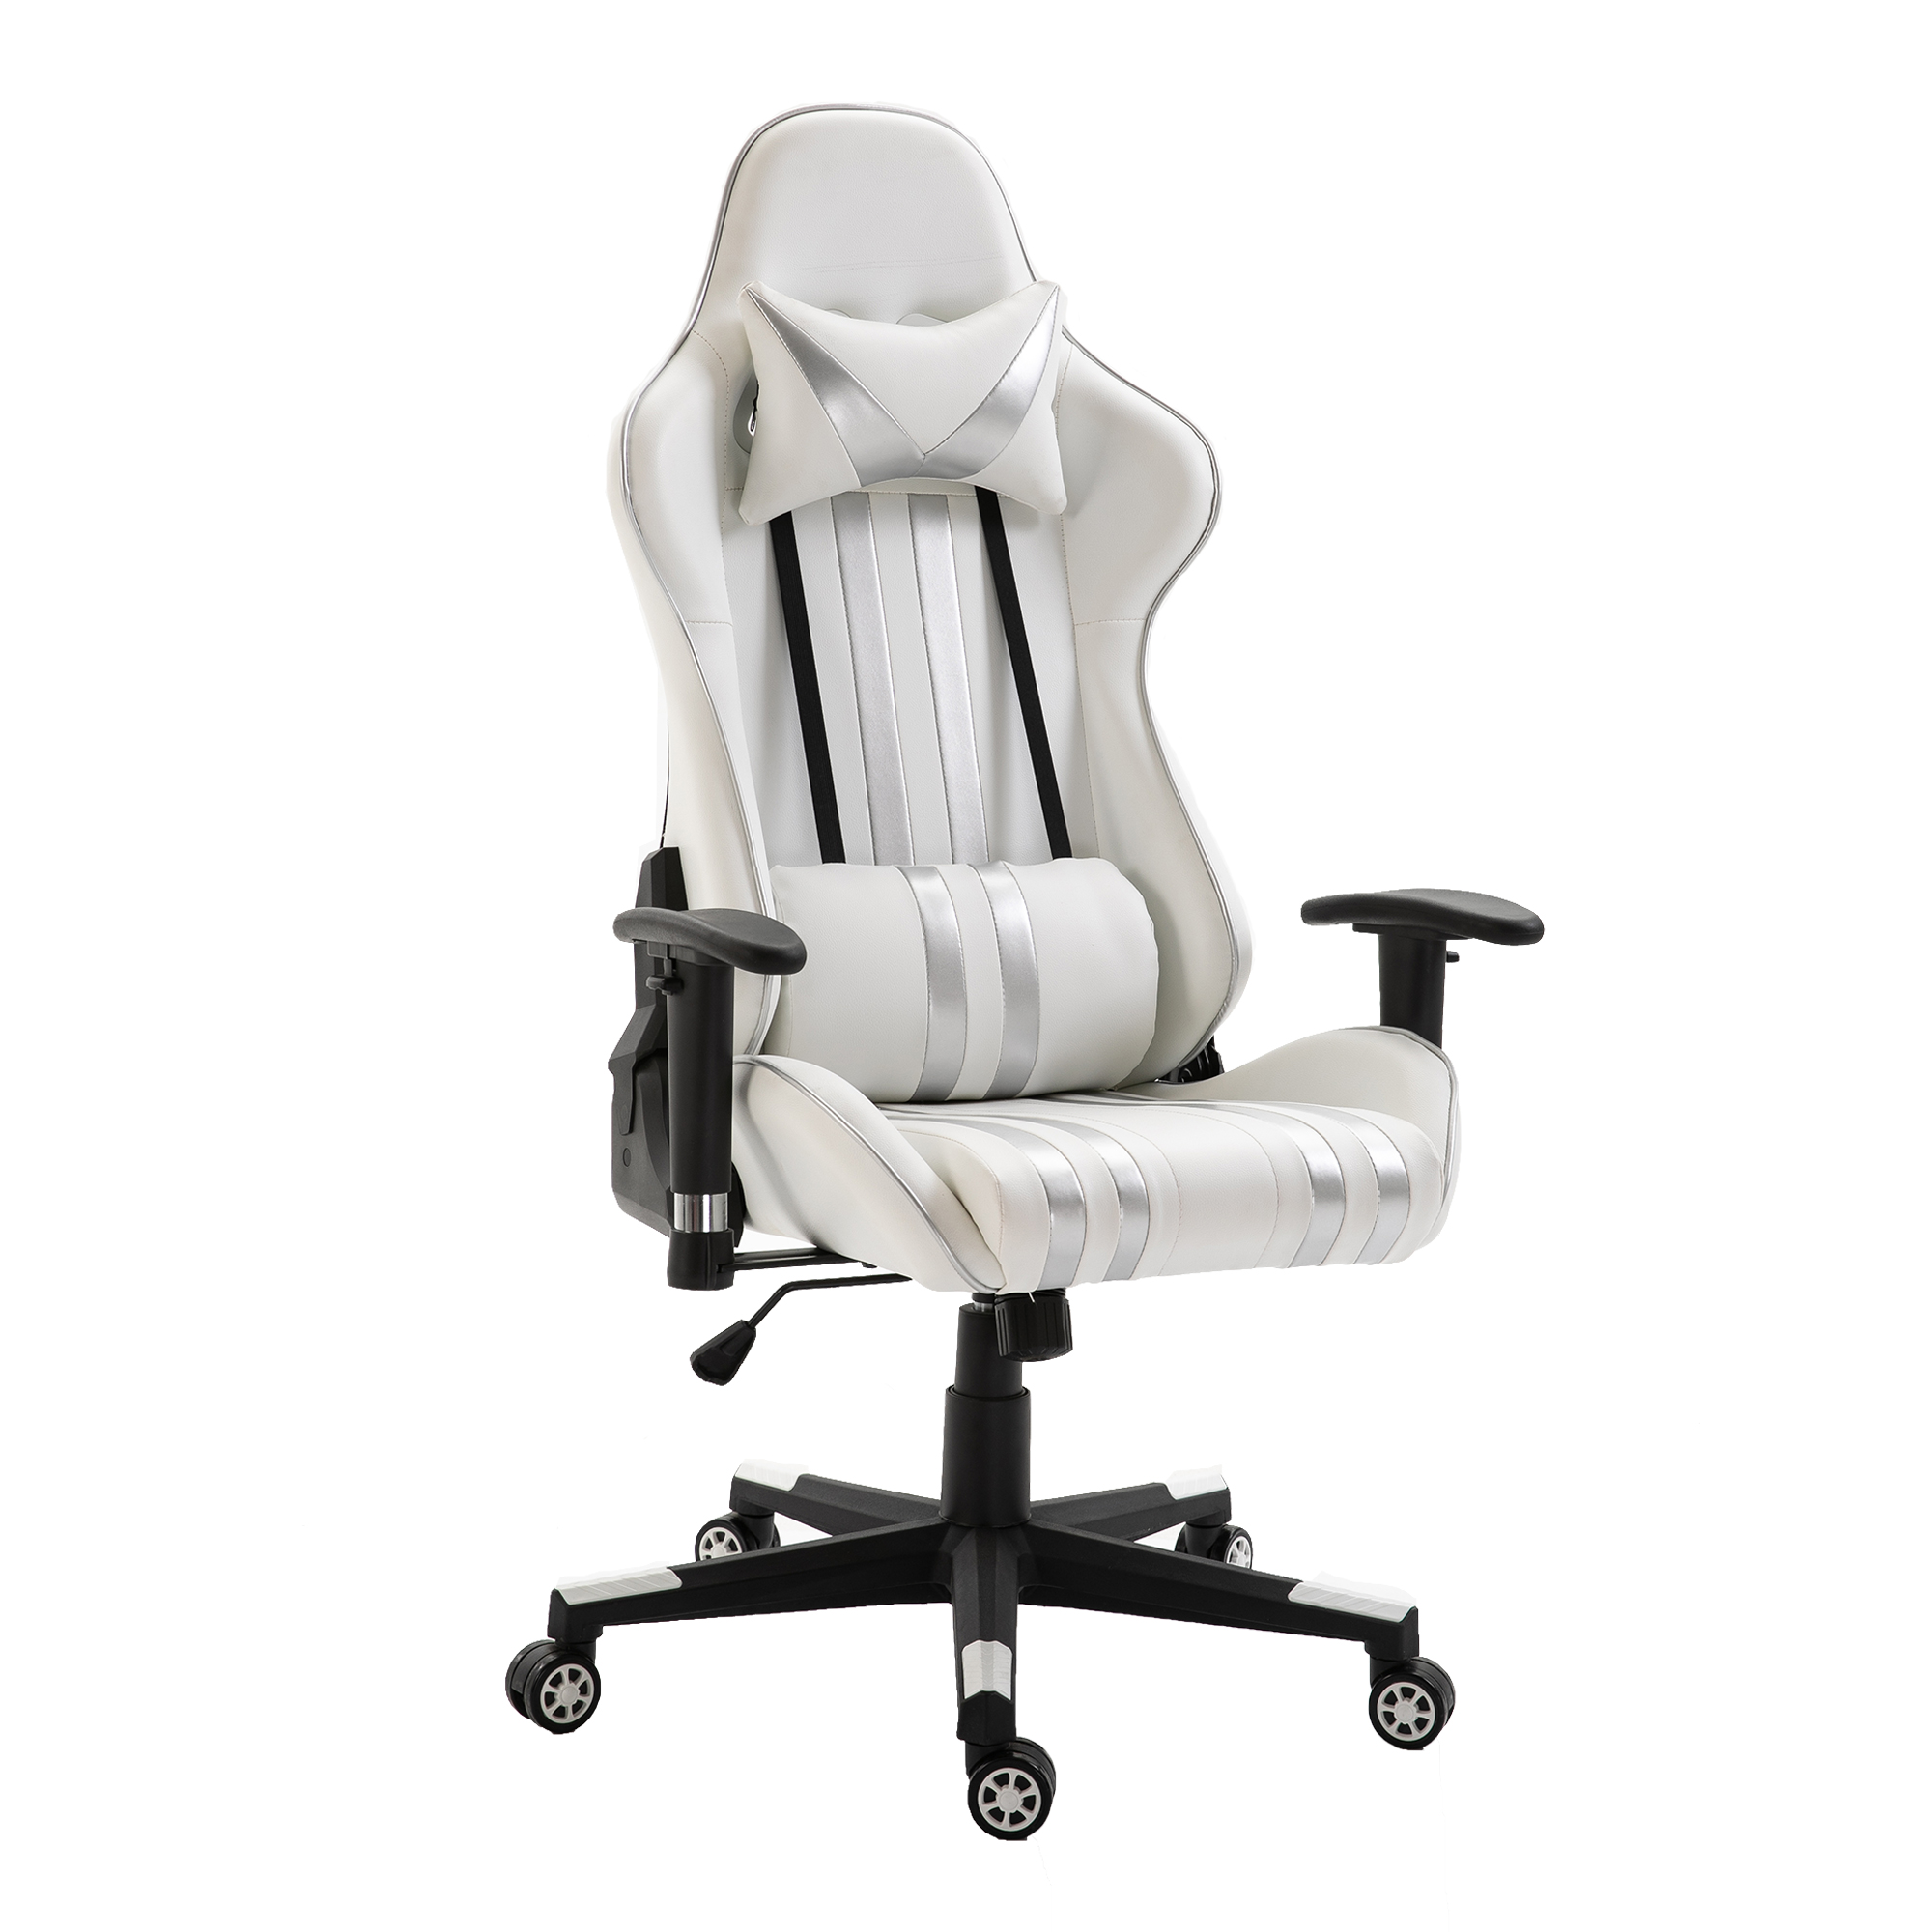 https://www.jifangfurniture.com/customized-good-quality-rotting-and-comfortable-ergonomic-backrest-gaming-chair-product/